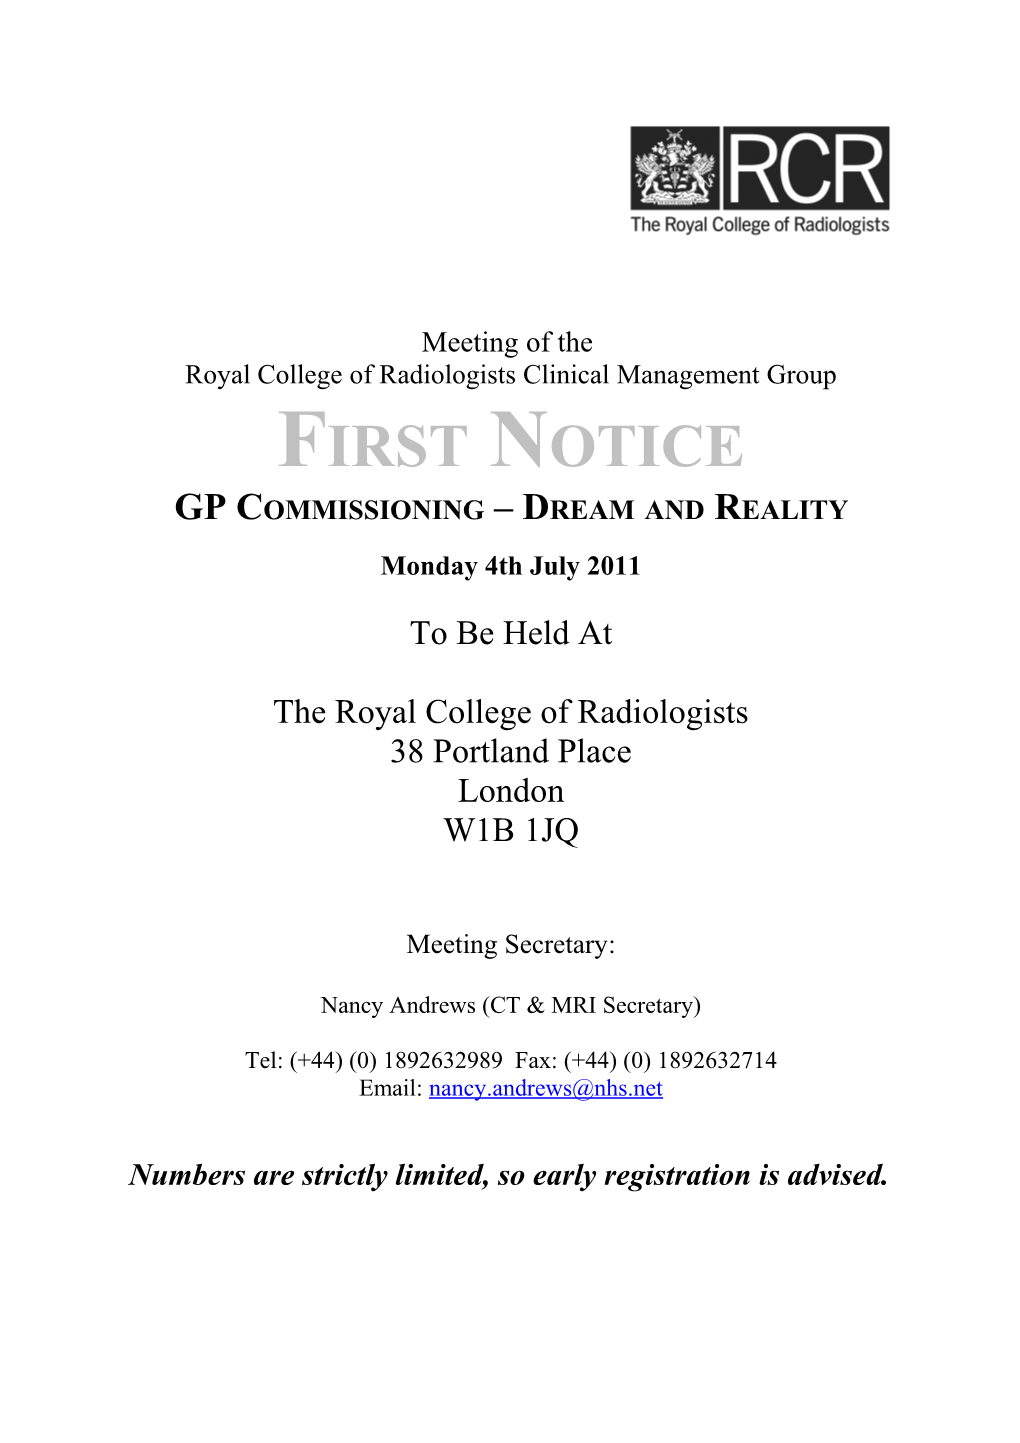 Royal College of Radiologists Clinical Management Group